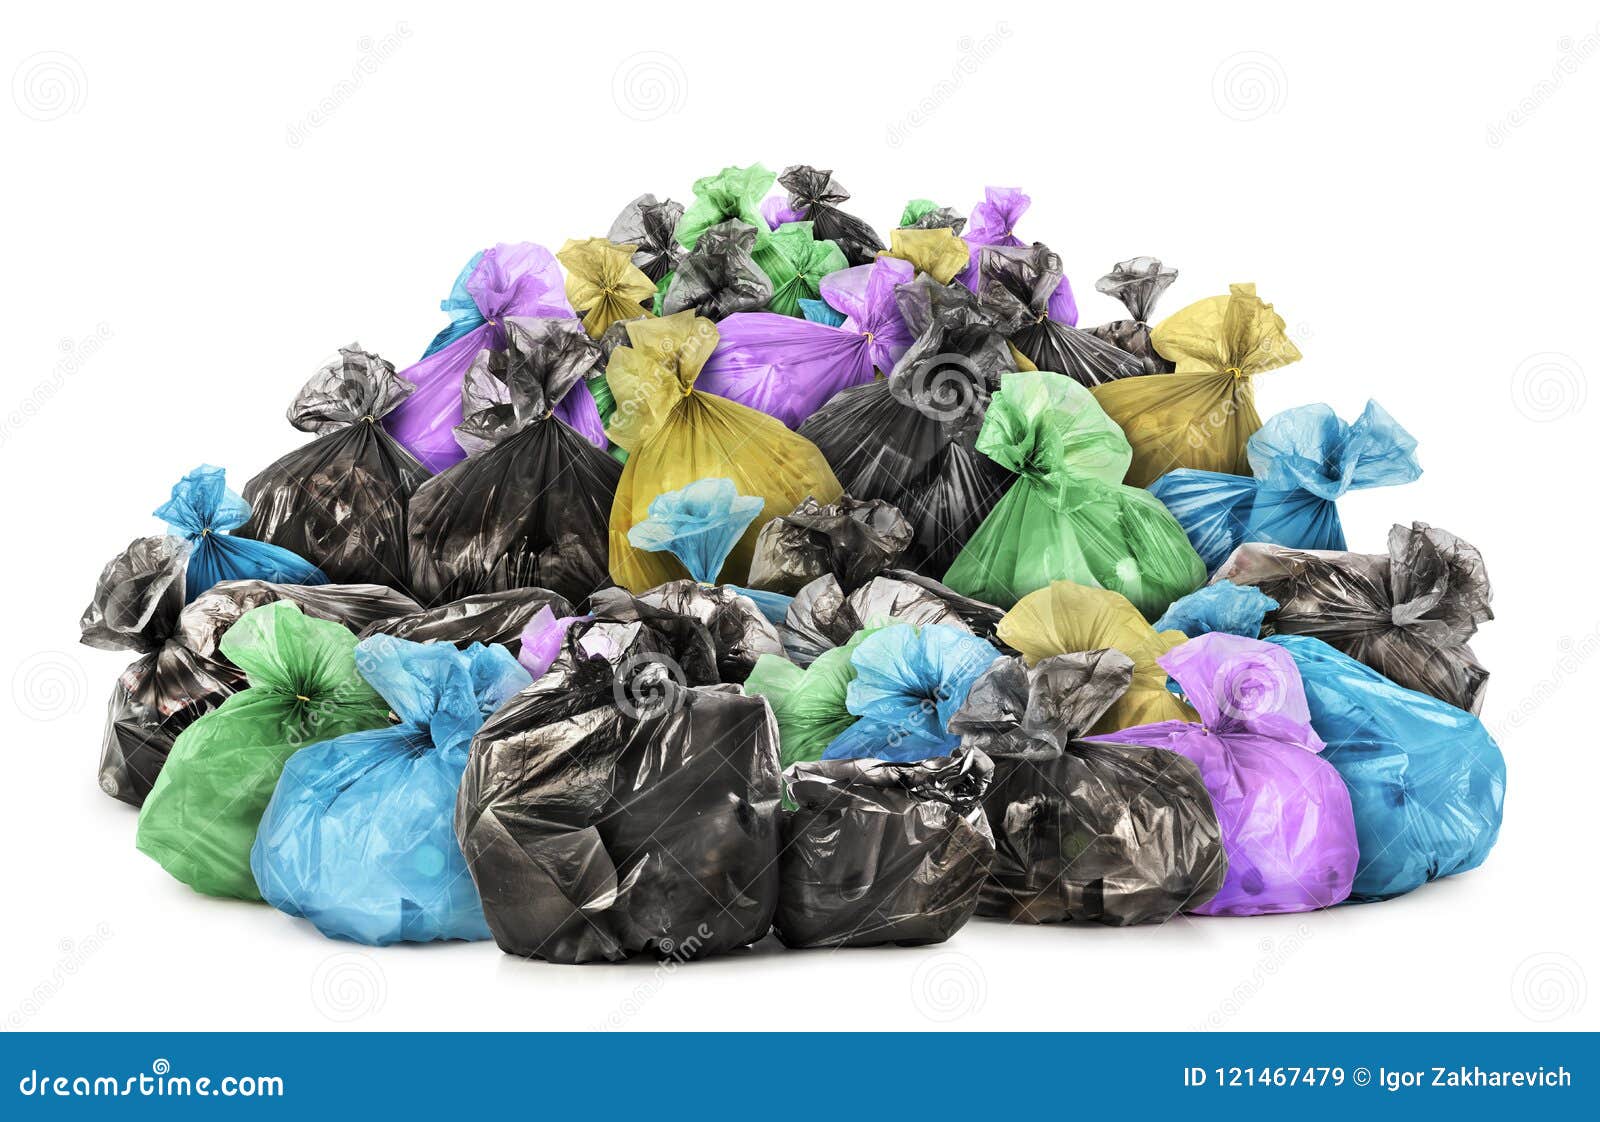 Trash Bags Isolated White Background Stock Photo by ©urfingus 203324536